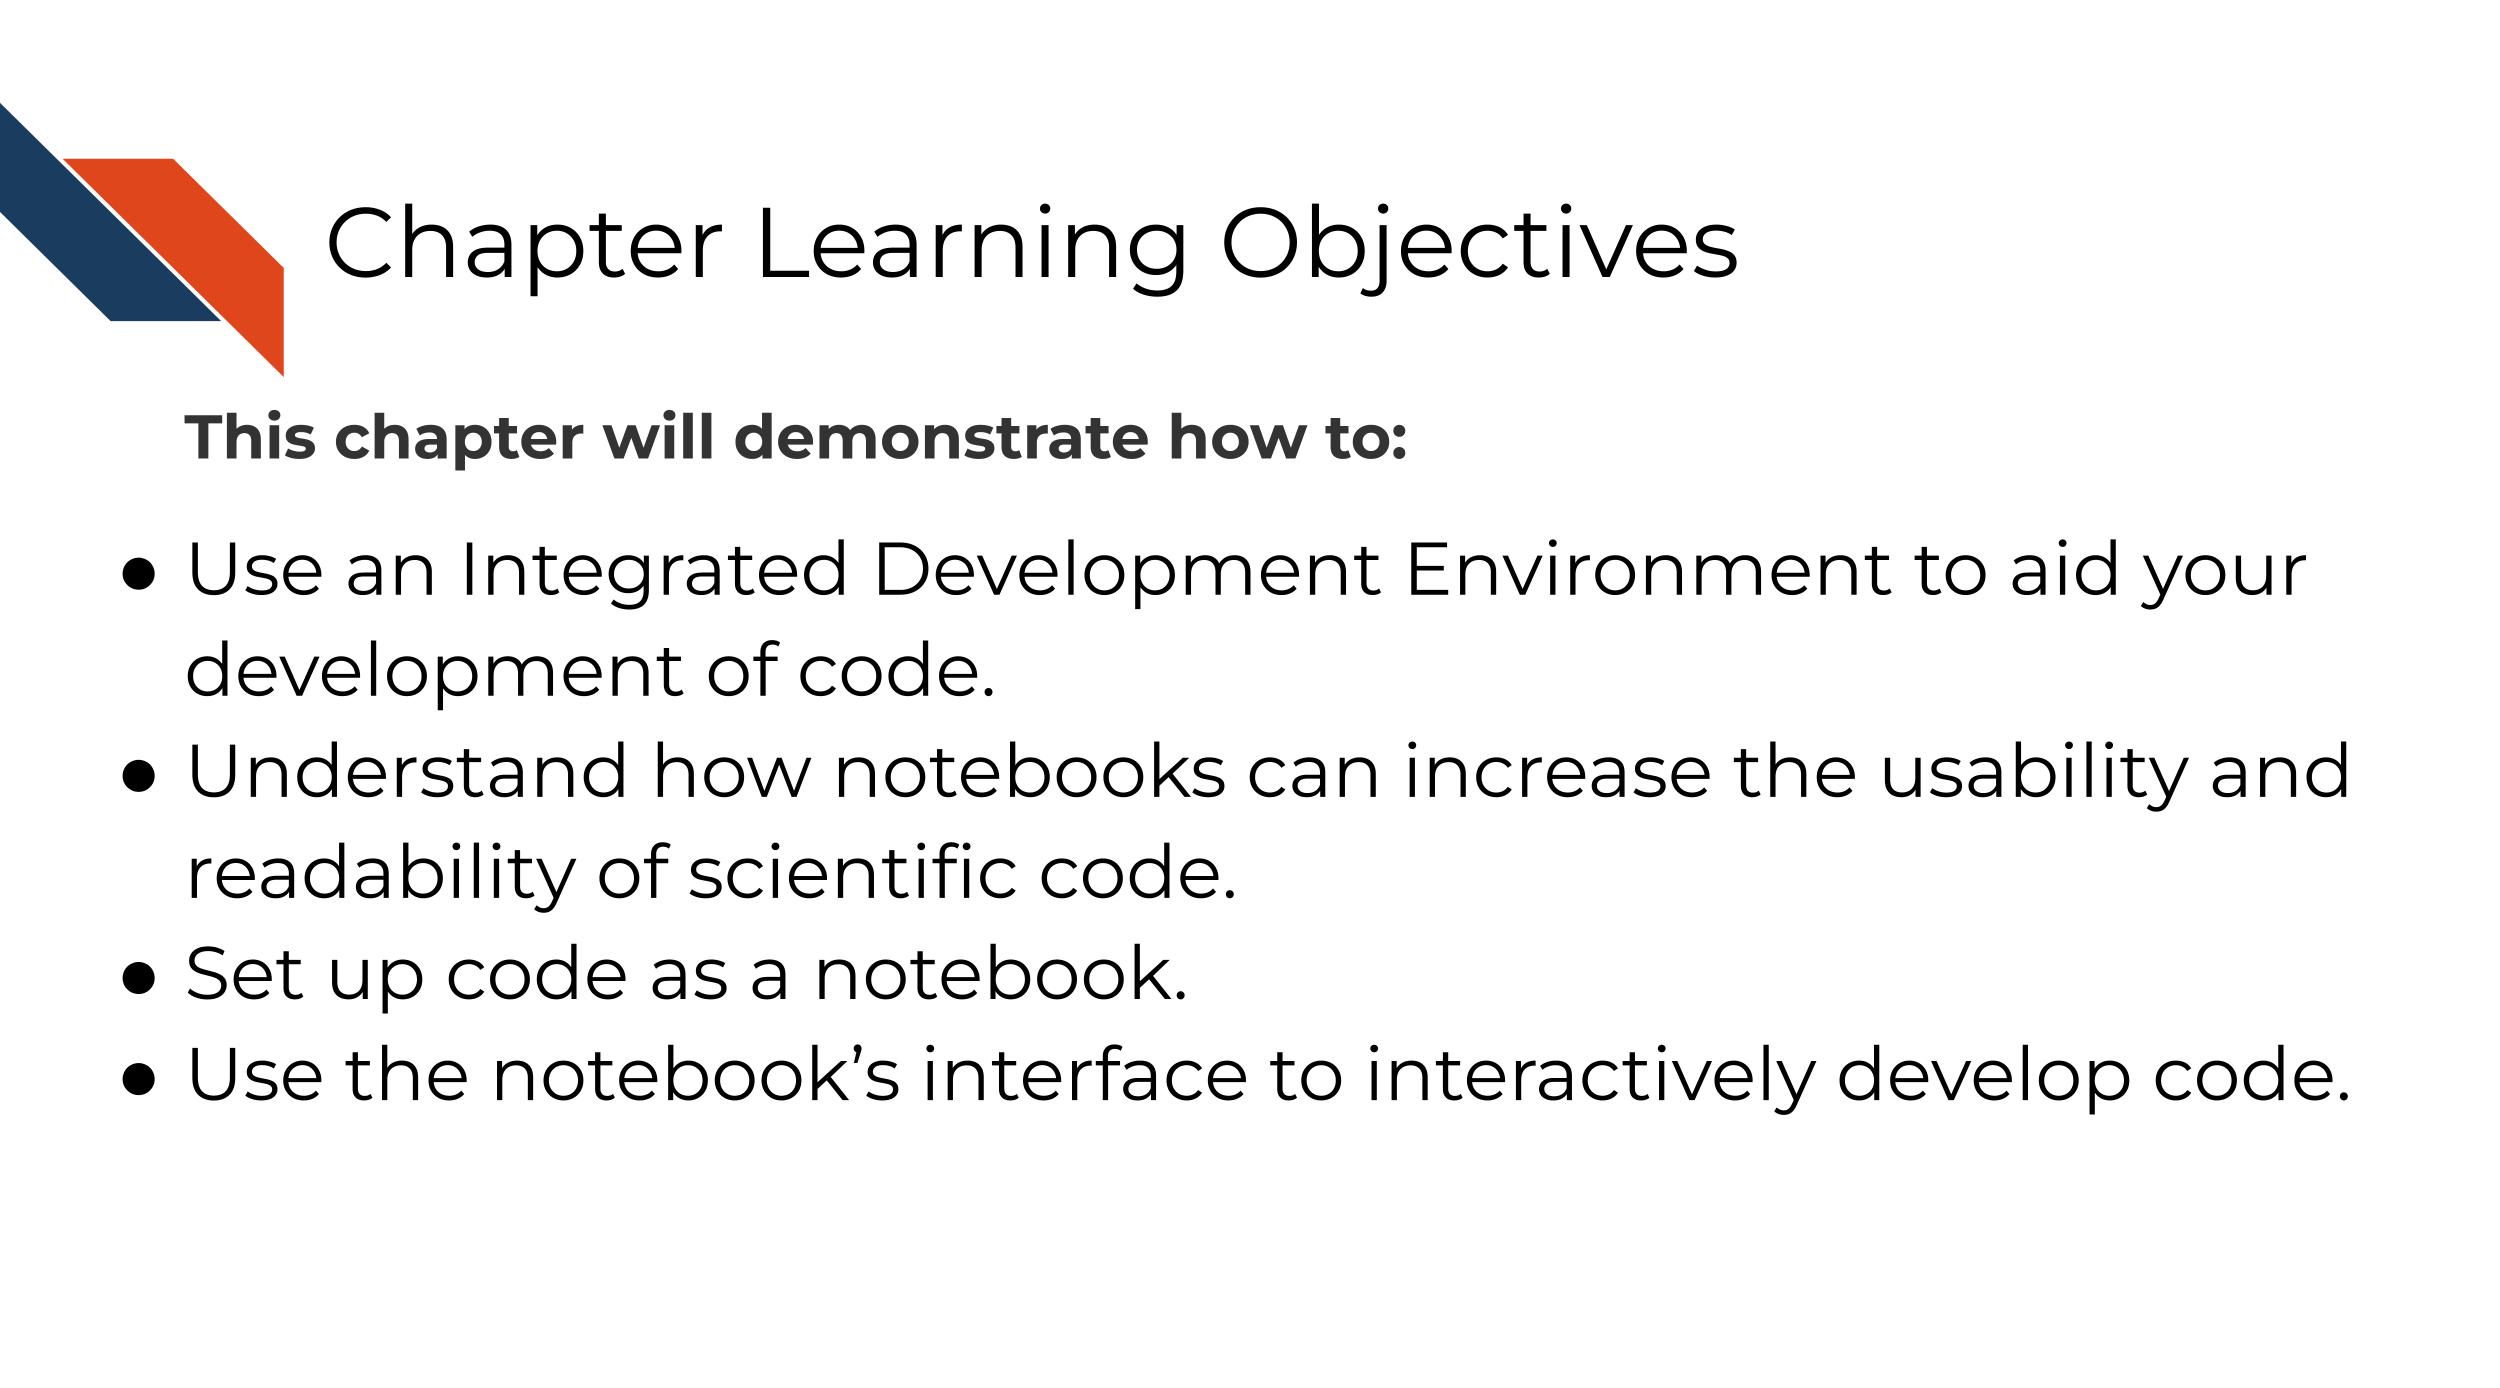 This chapter will demonstrate how to: Use an Integrated Development Environment to aid your development of code. Understand how notebooks can increase the usability and readability of scientific code. Set up code as a notebook. Use the notebook’s interface to interactively develop code.